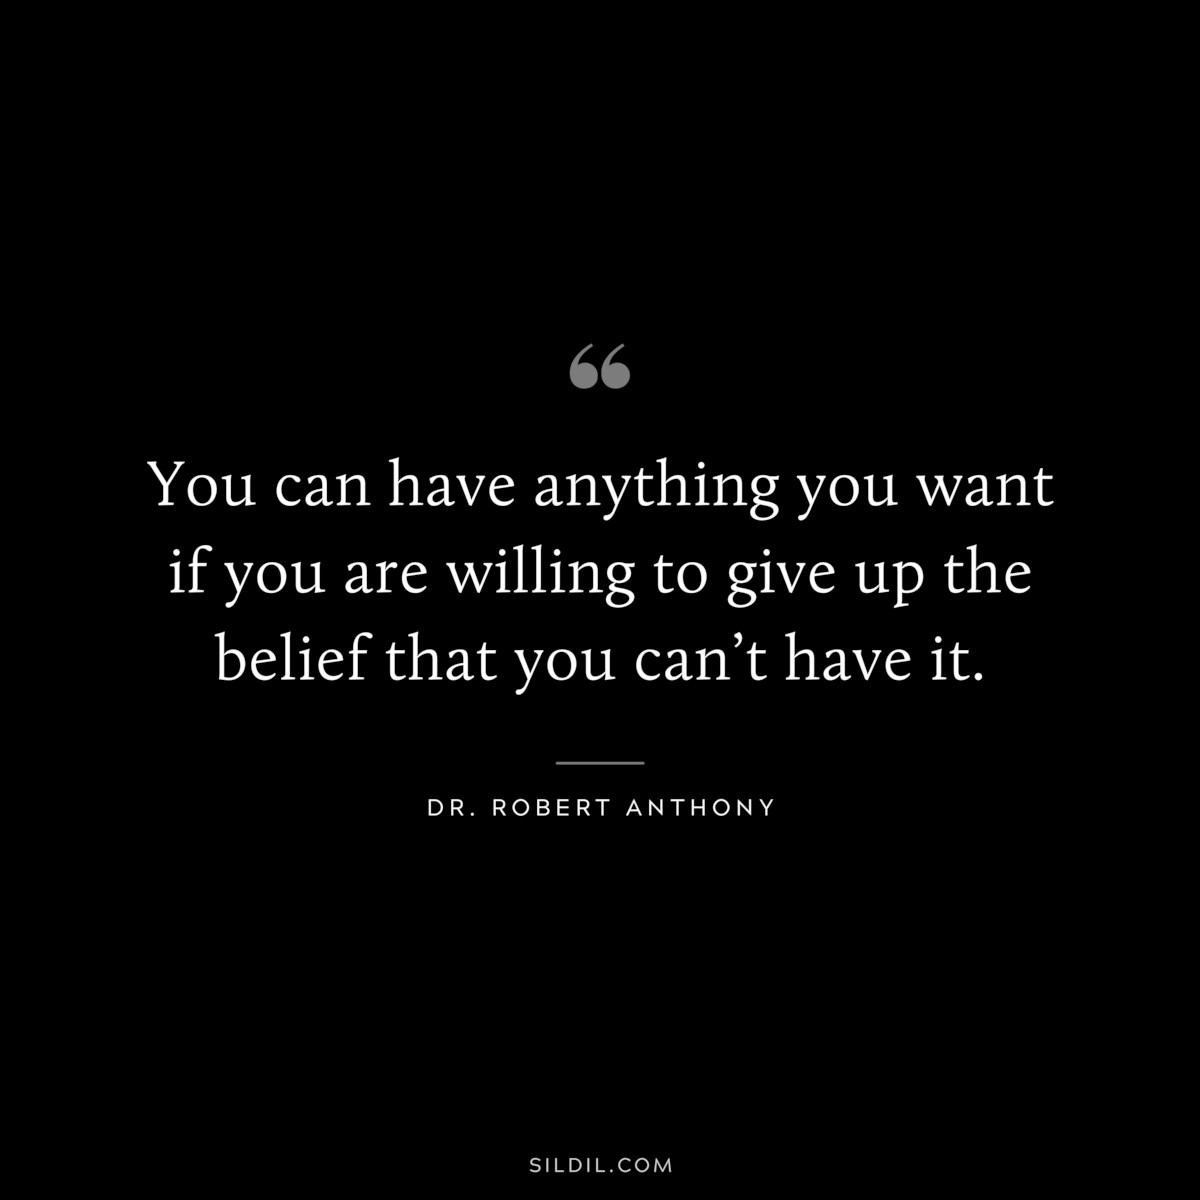 You can have anything you want if you are willing to give up the belief that you can’t have it. ― Dr. Robert Anthony